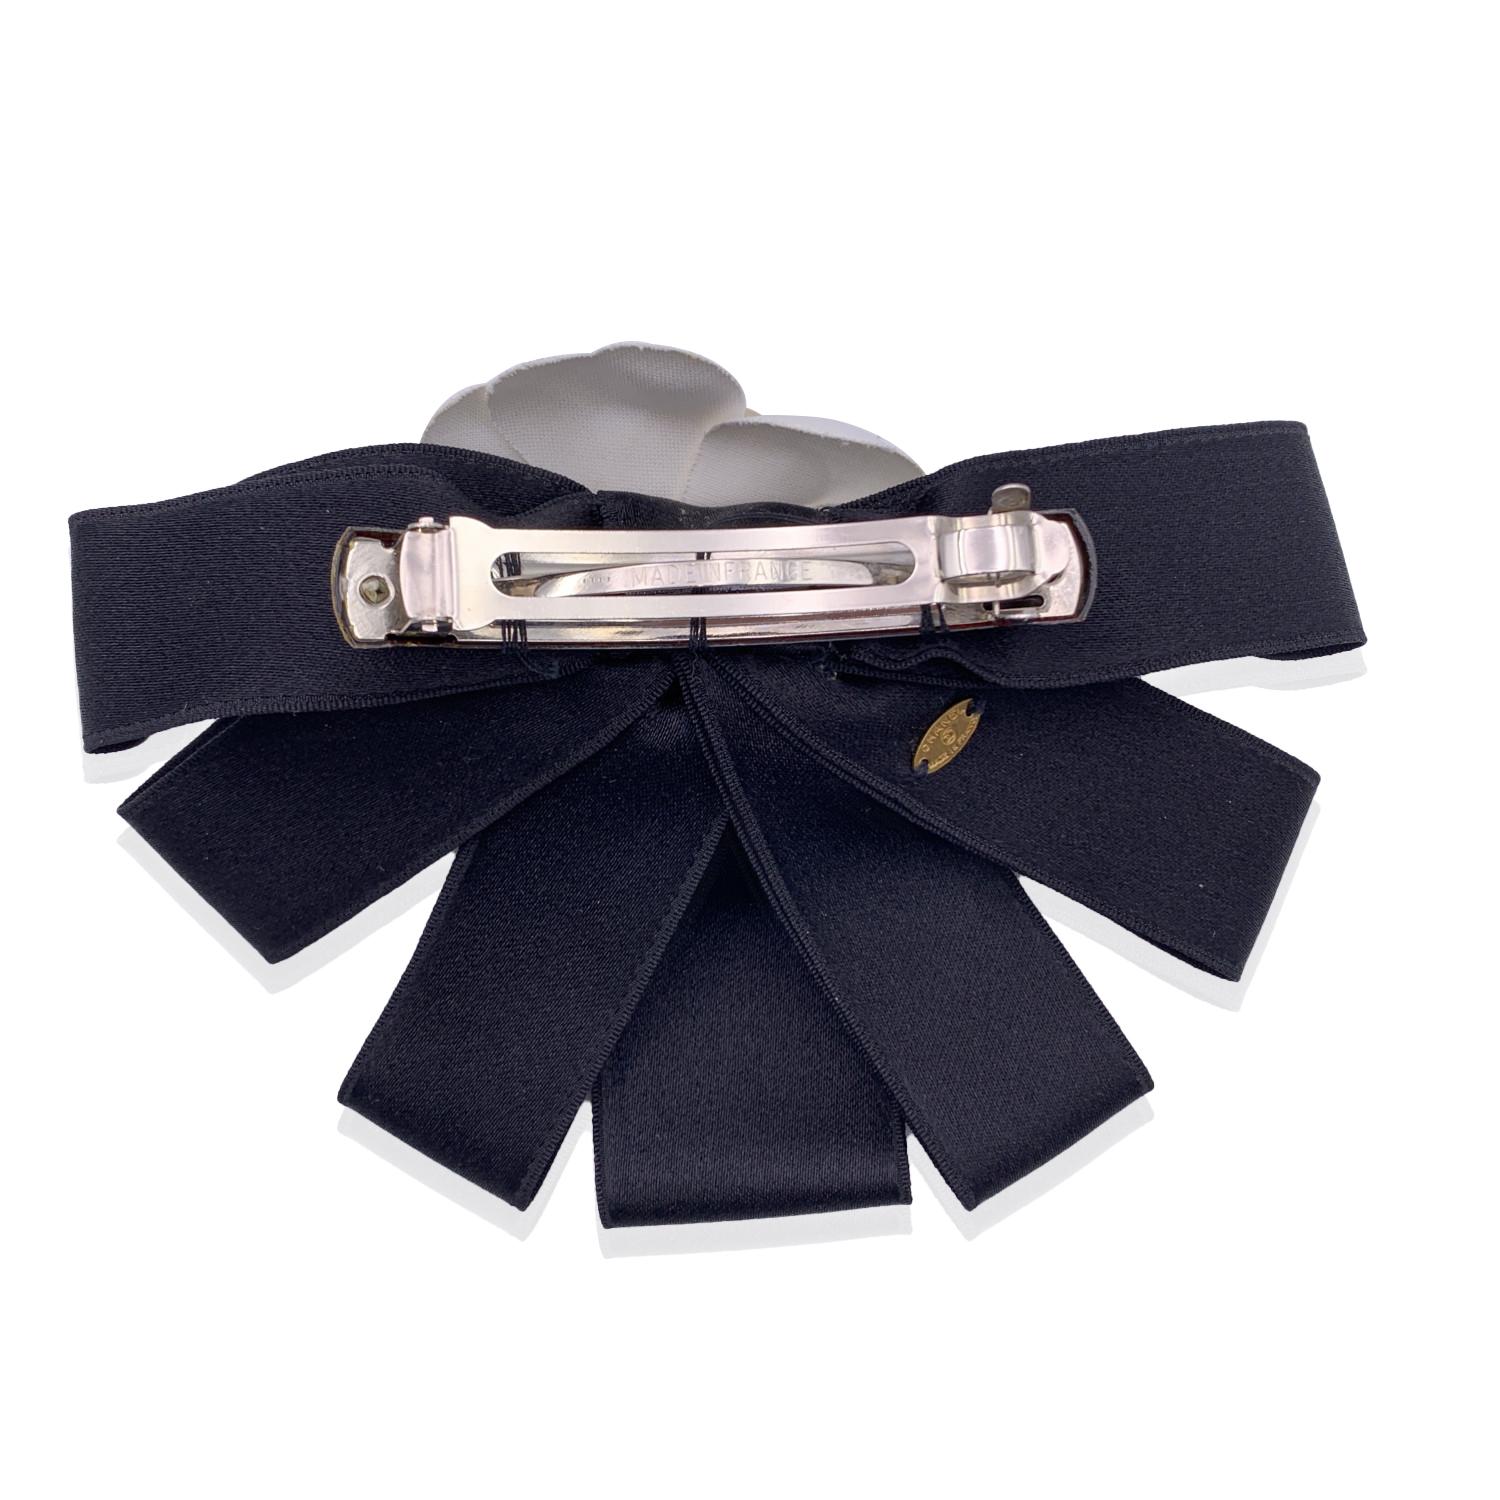 Lovely vintage Chanel barrette hair clip. White silk Camellia flower with black silk bow.
'Made in France' engraved on the back of the clip. 'Chanel CC Made in France' oval tab on the back. Width: 6.5 inches - 16.5 cm


Details

MATERIAL: